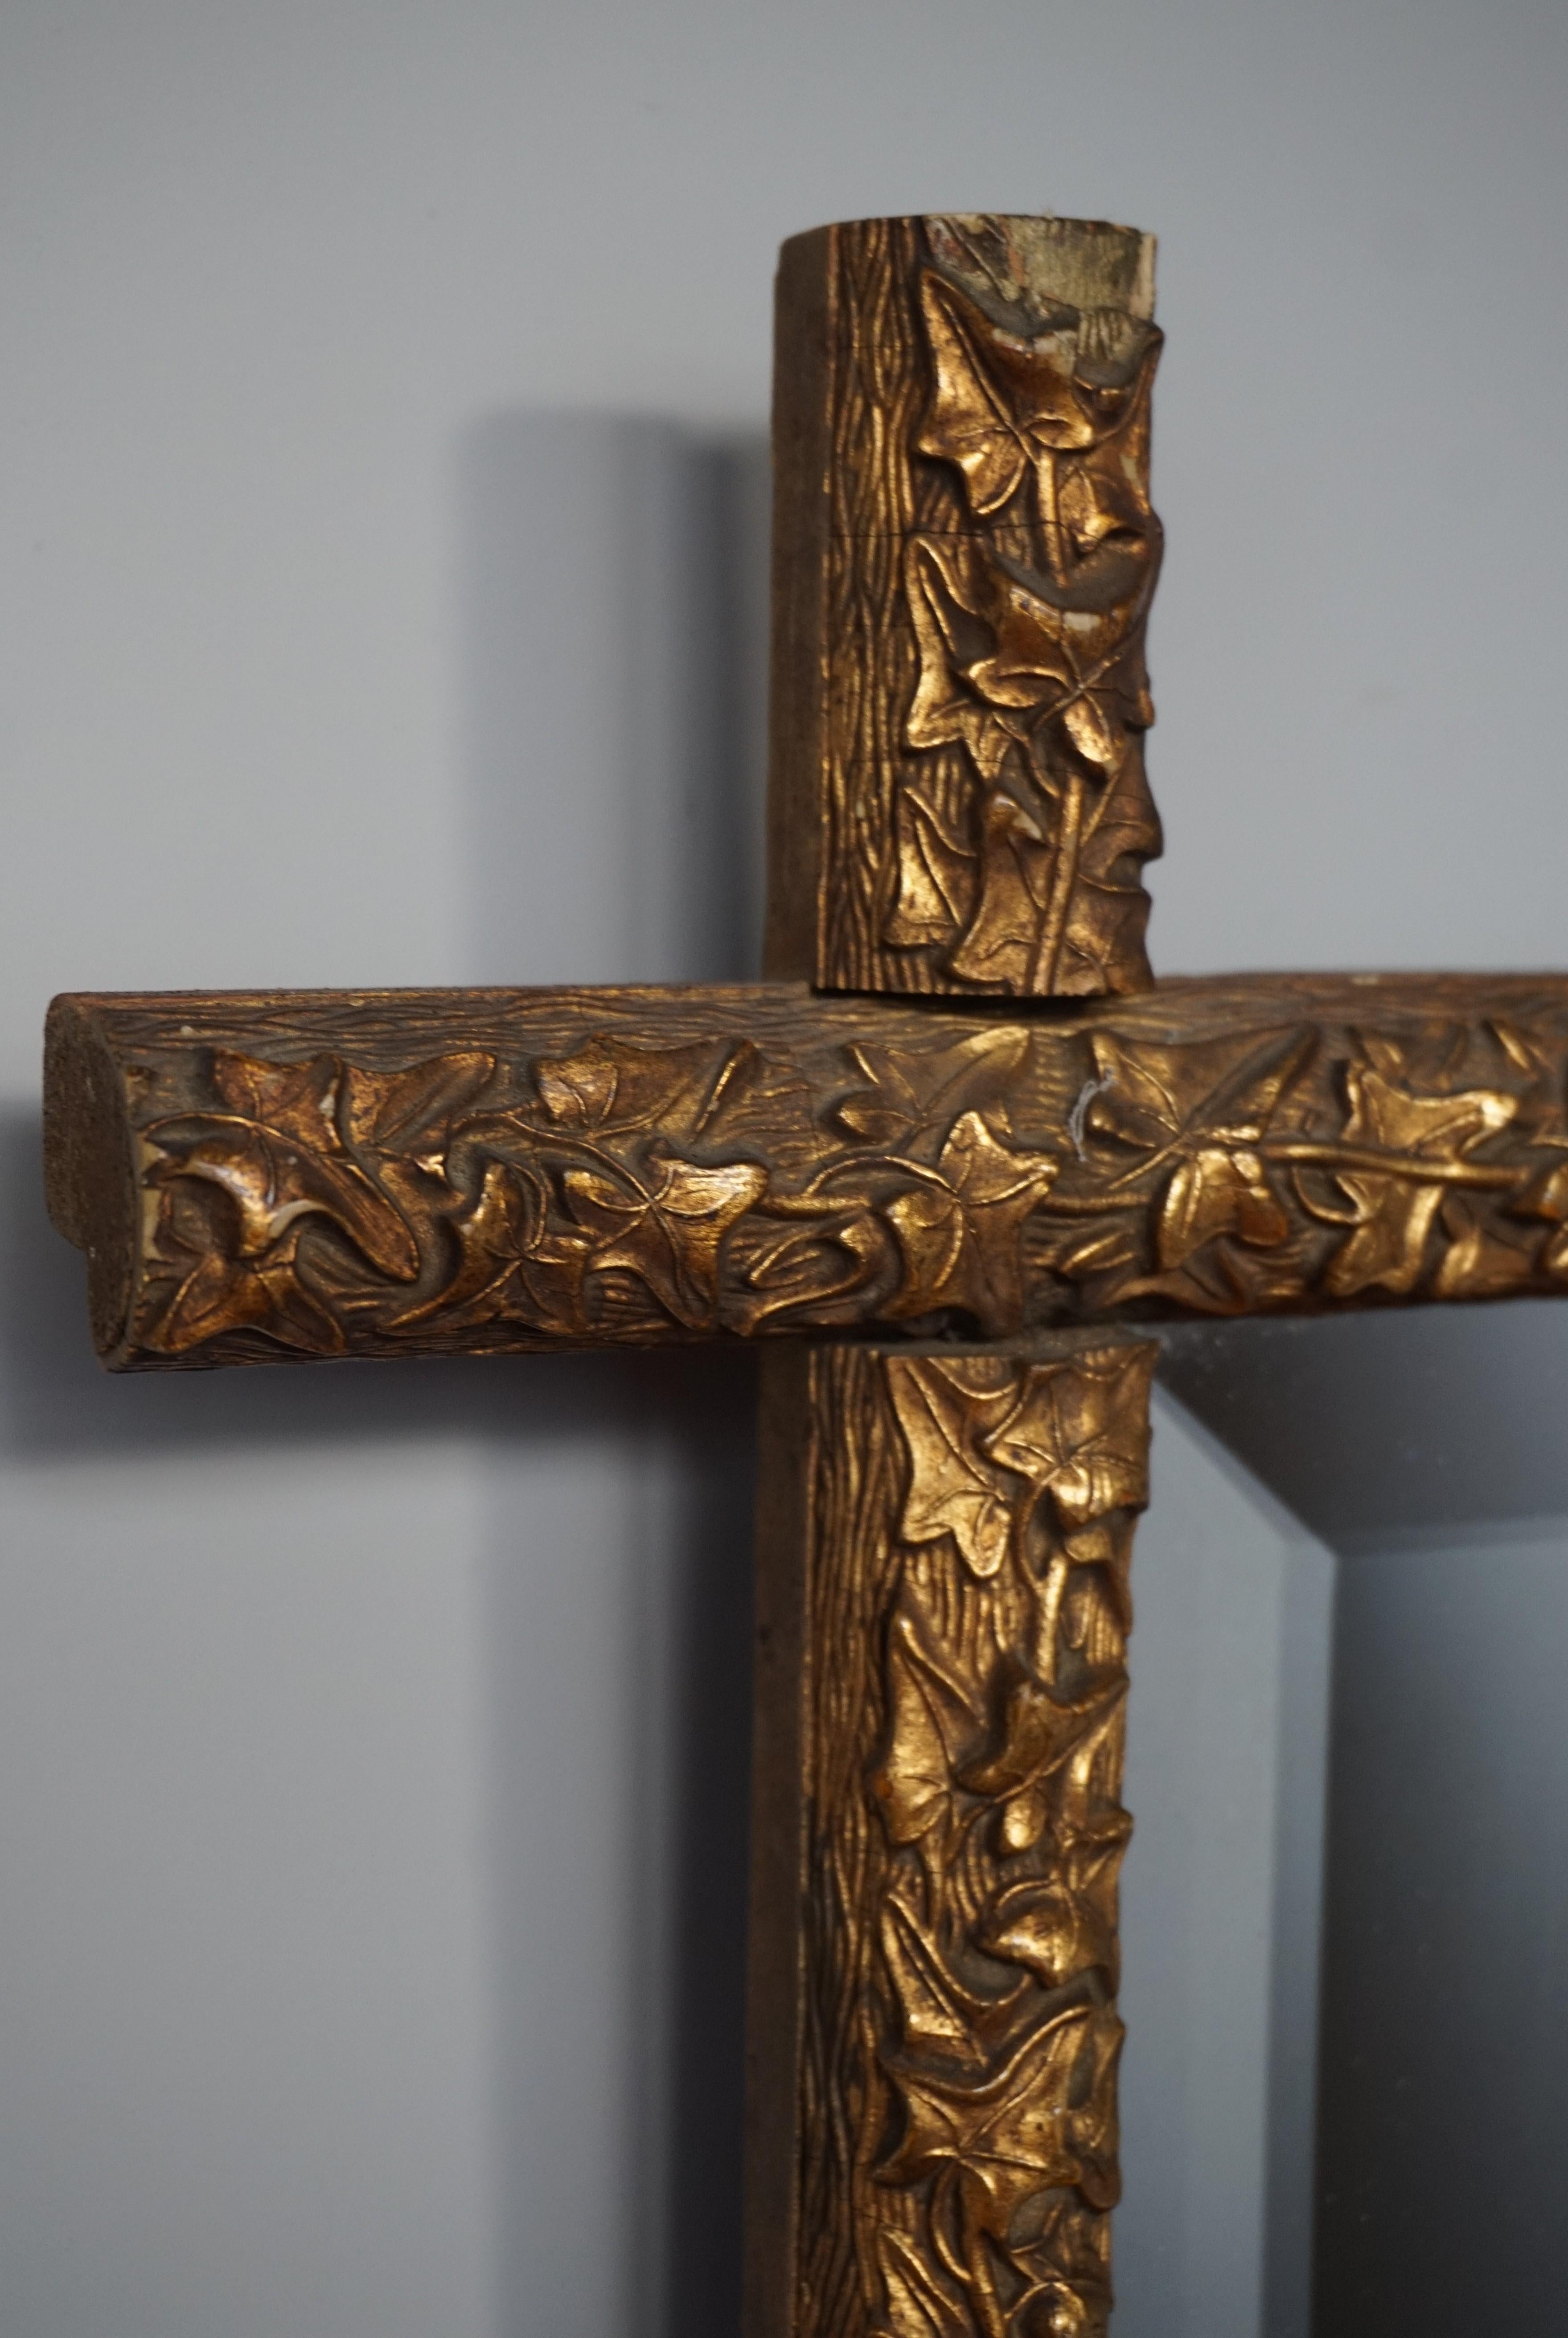 European Antique Handcrafted Gothic Revival Gilt Leafs on Wooden Frame 1880s Cross Mirror For Sale